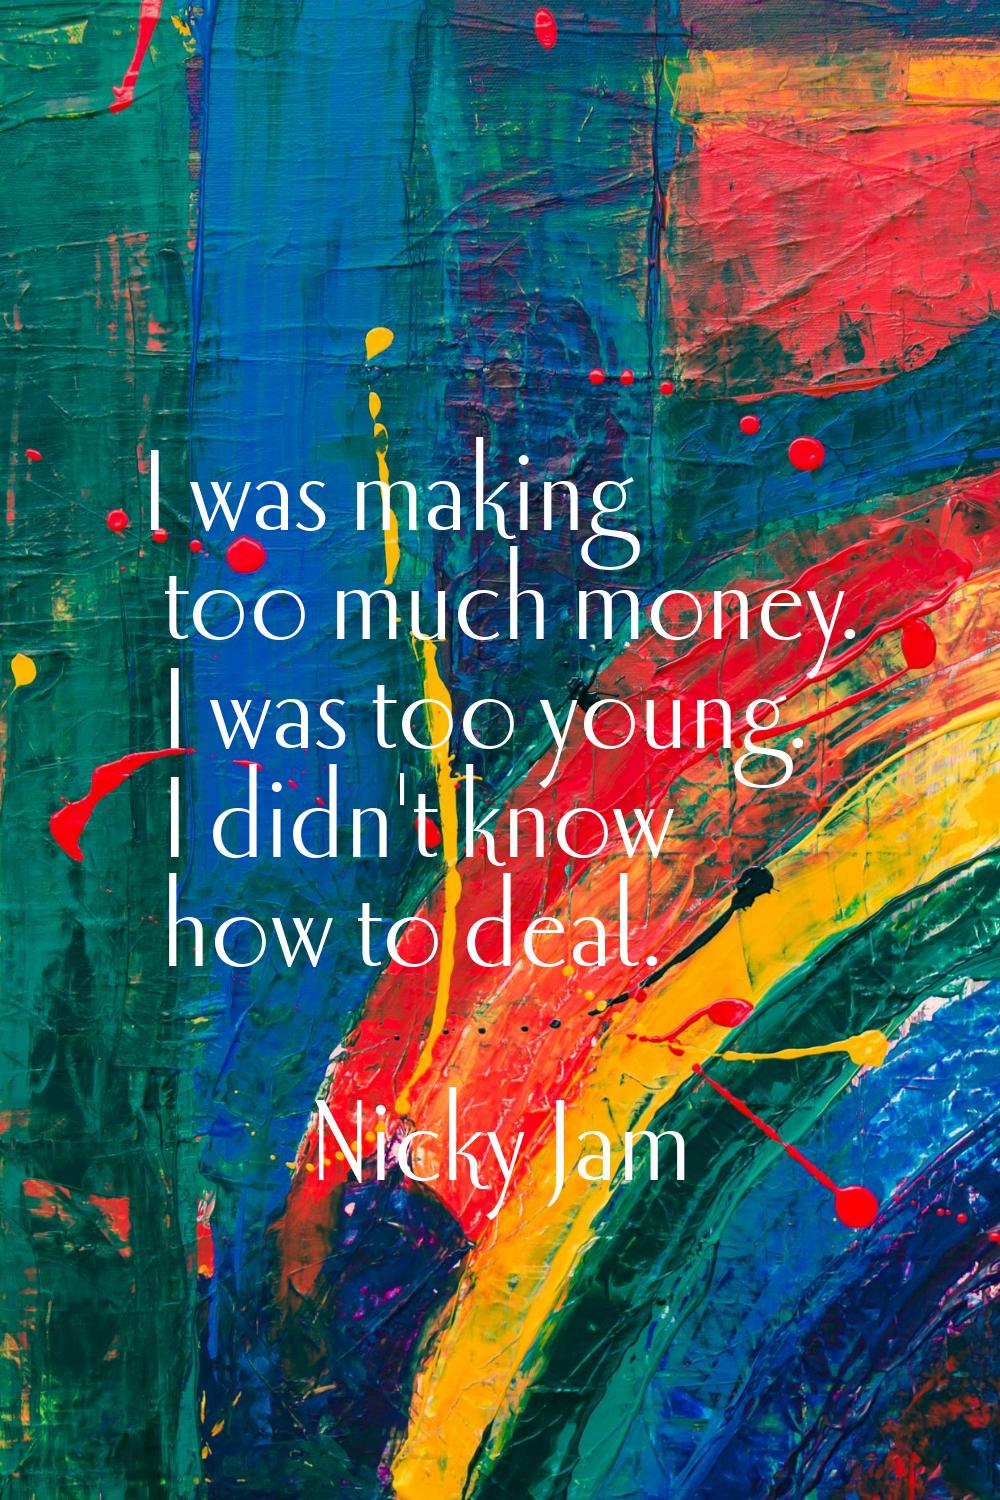 I was making too much money. I was too young. I didn't know how to deal.